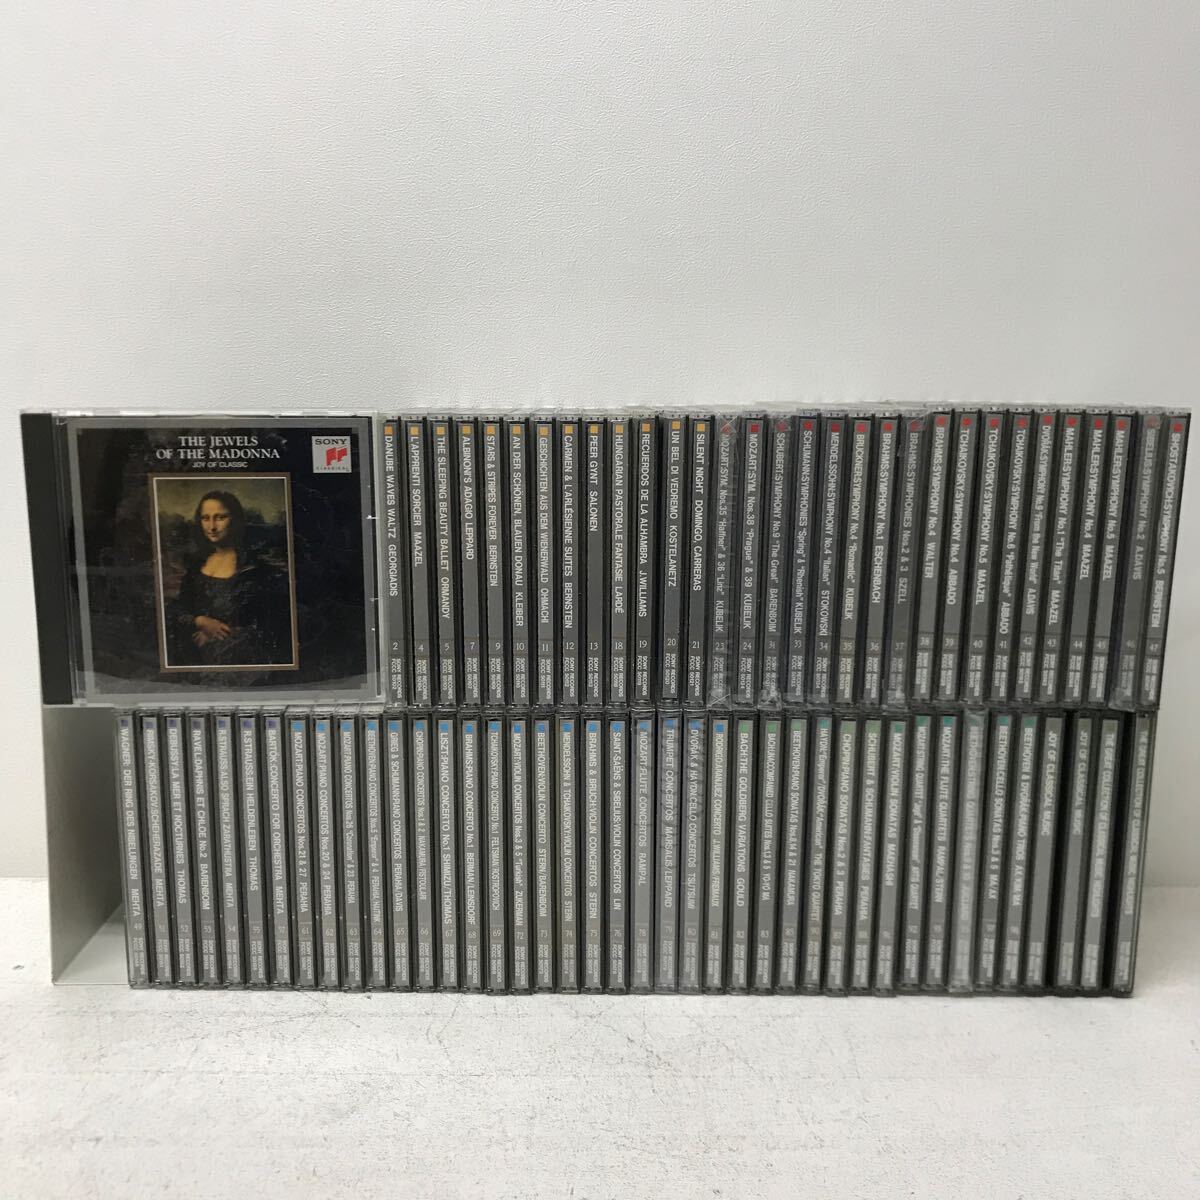 I0418H3 まとめ★未開封あり THE GREAT COLLECTION OF CLASSICAL MUSIC CD 81巻セット 音楽 クラシック ベートーヴェン モーツァルト 他_画像1